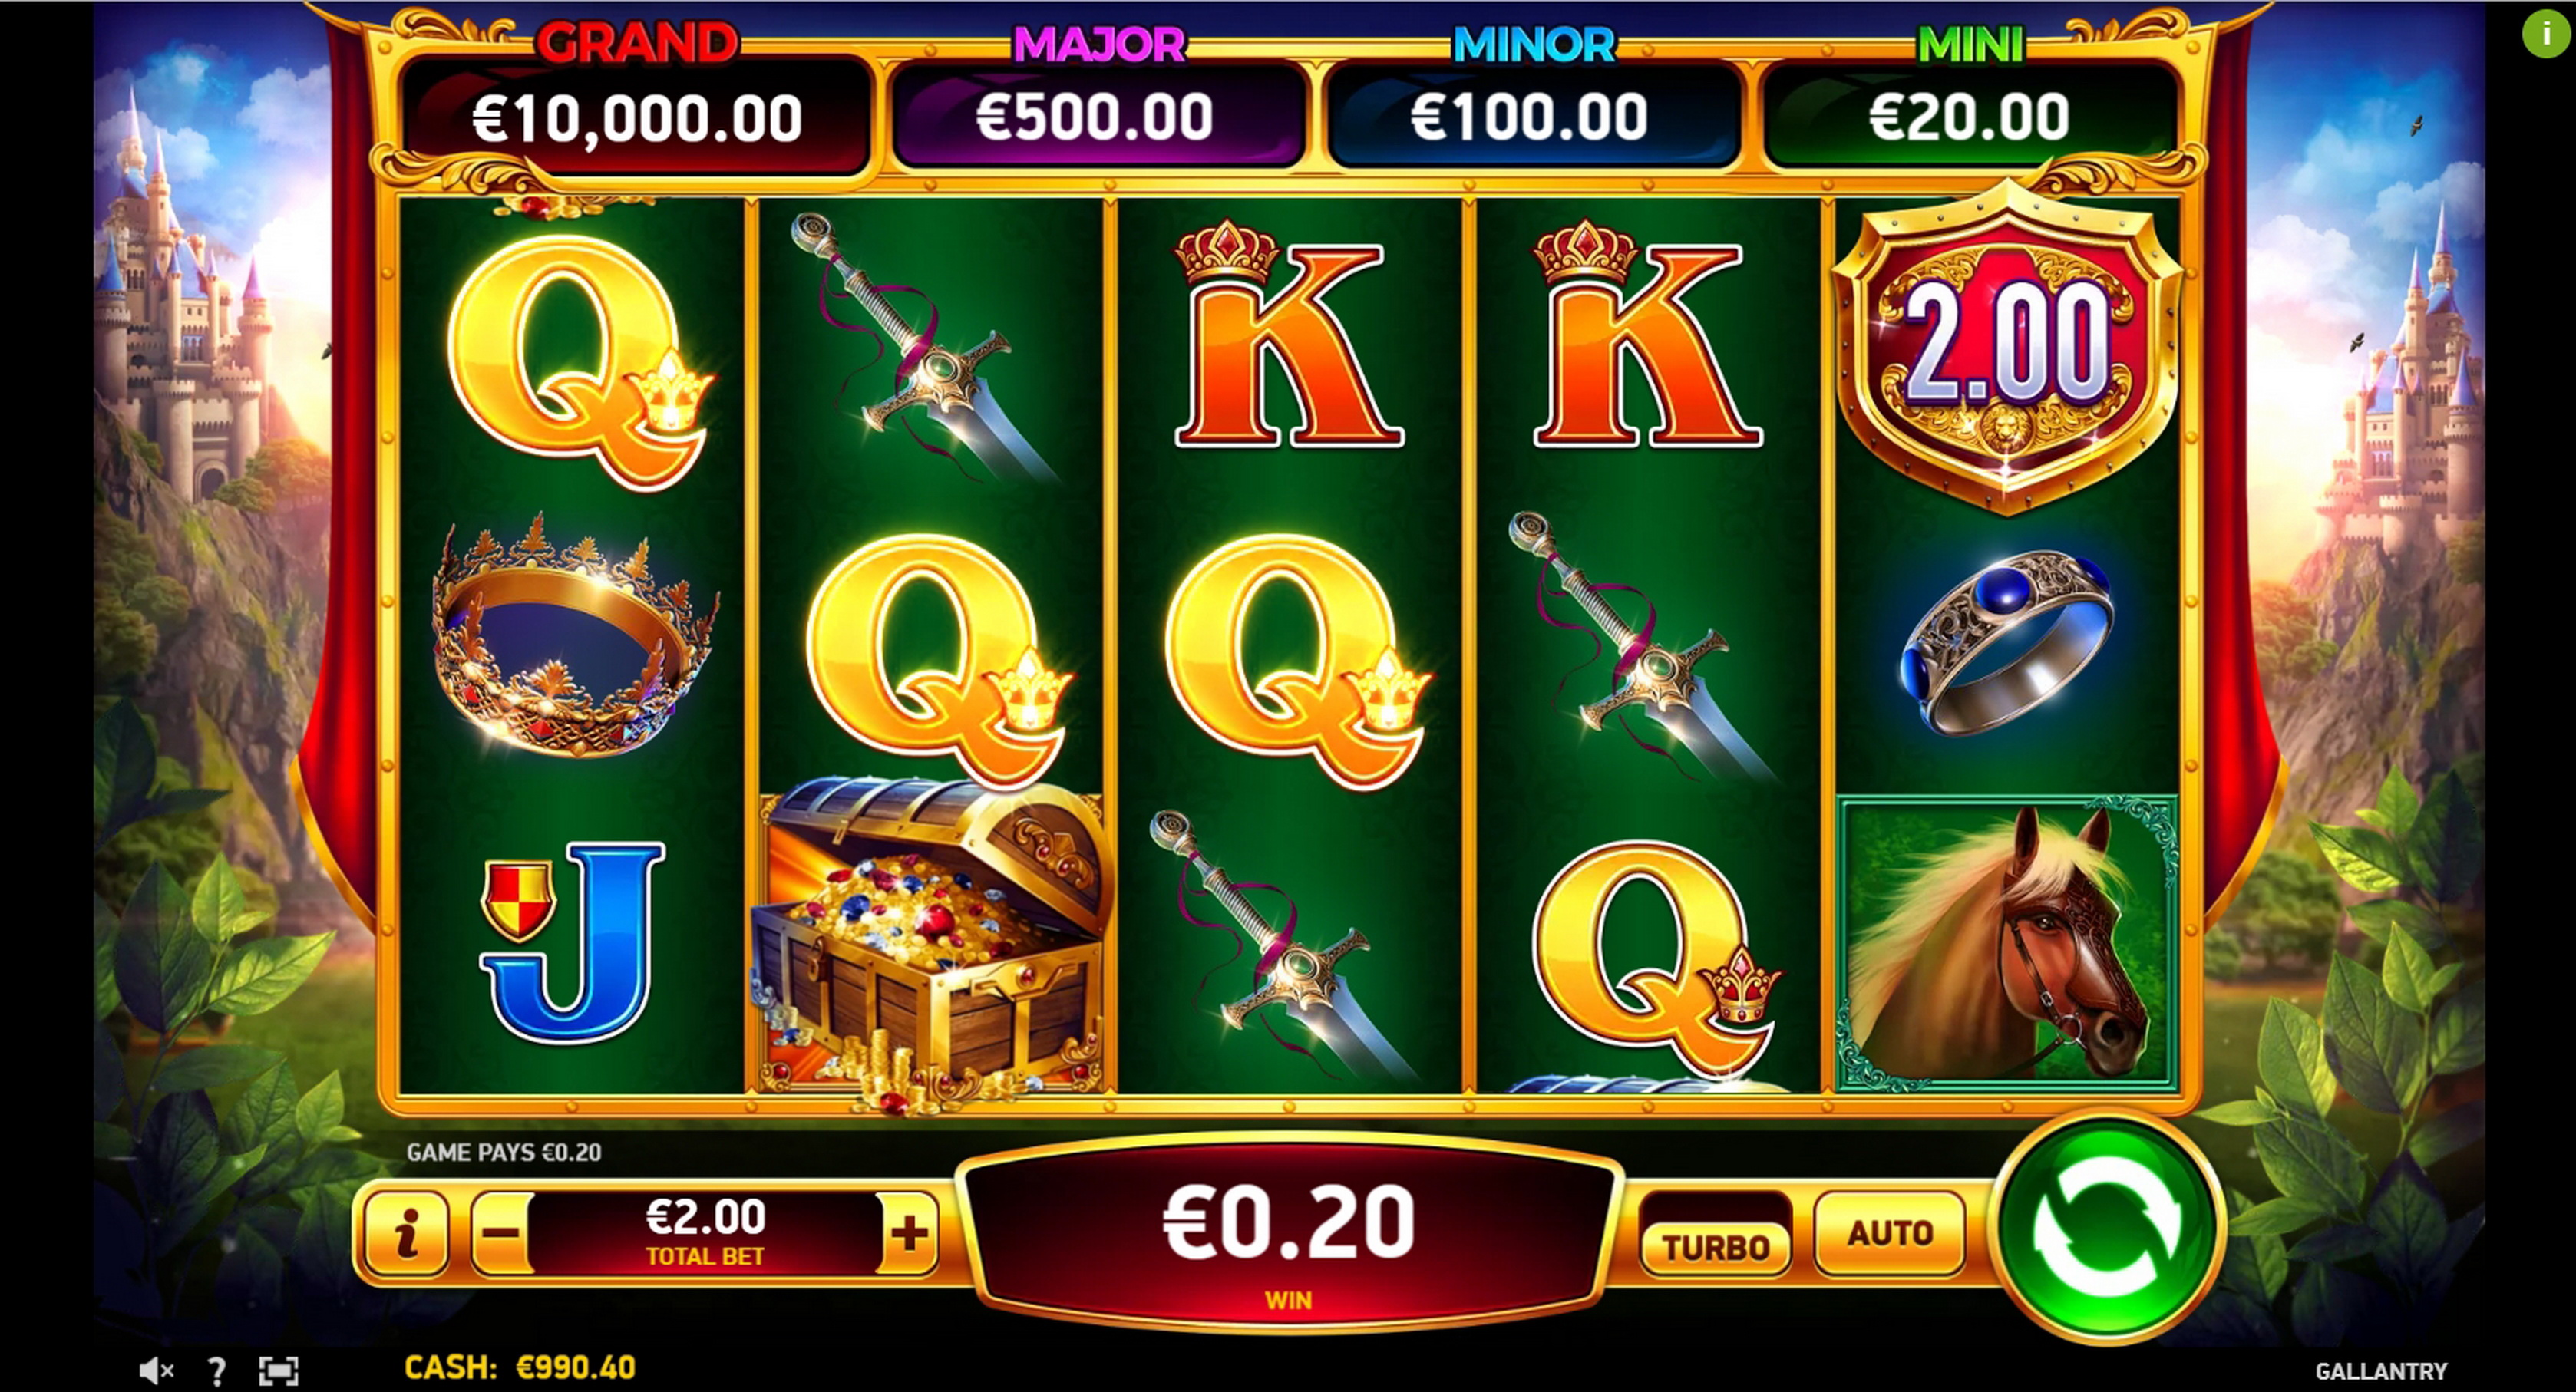 Win Money in Gallantry Free Slot Game by Ruby Play